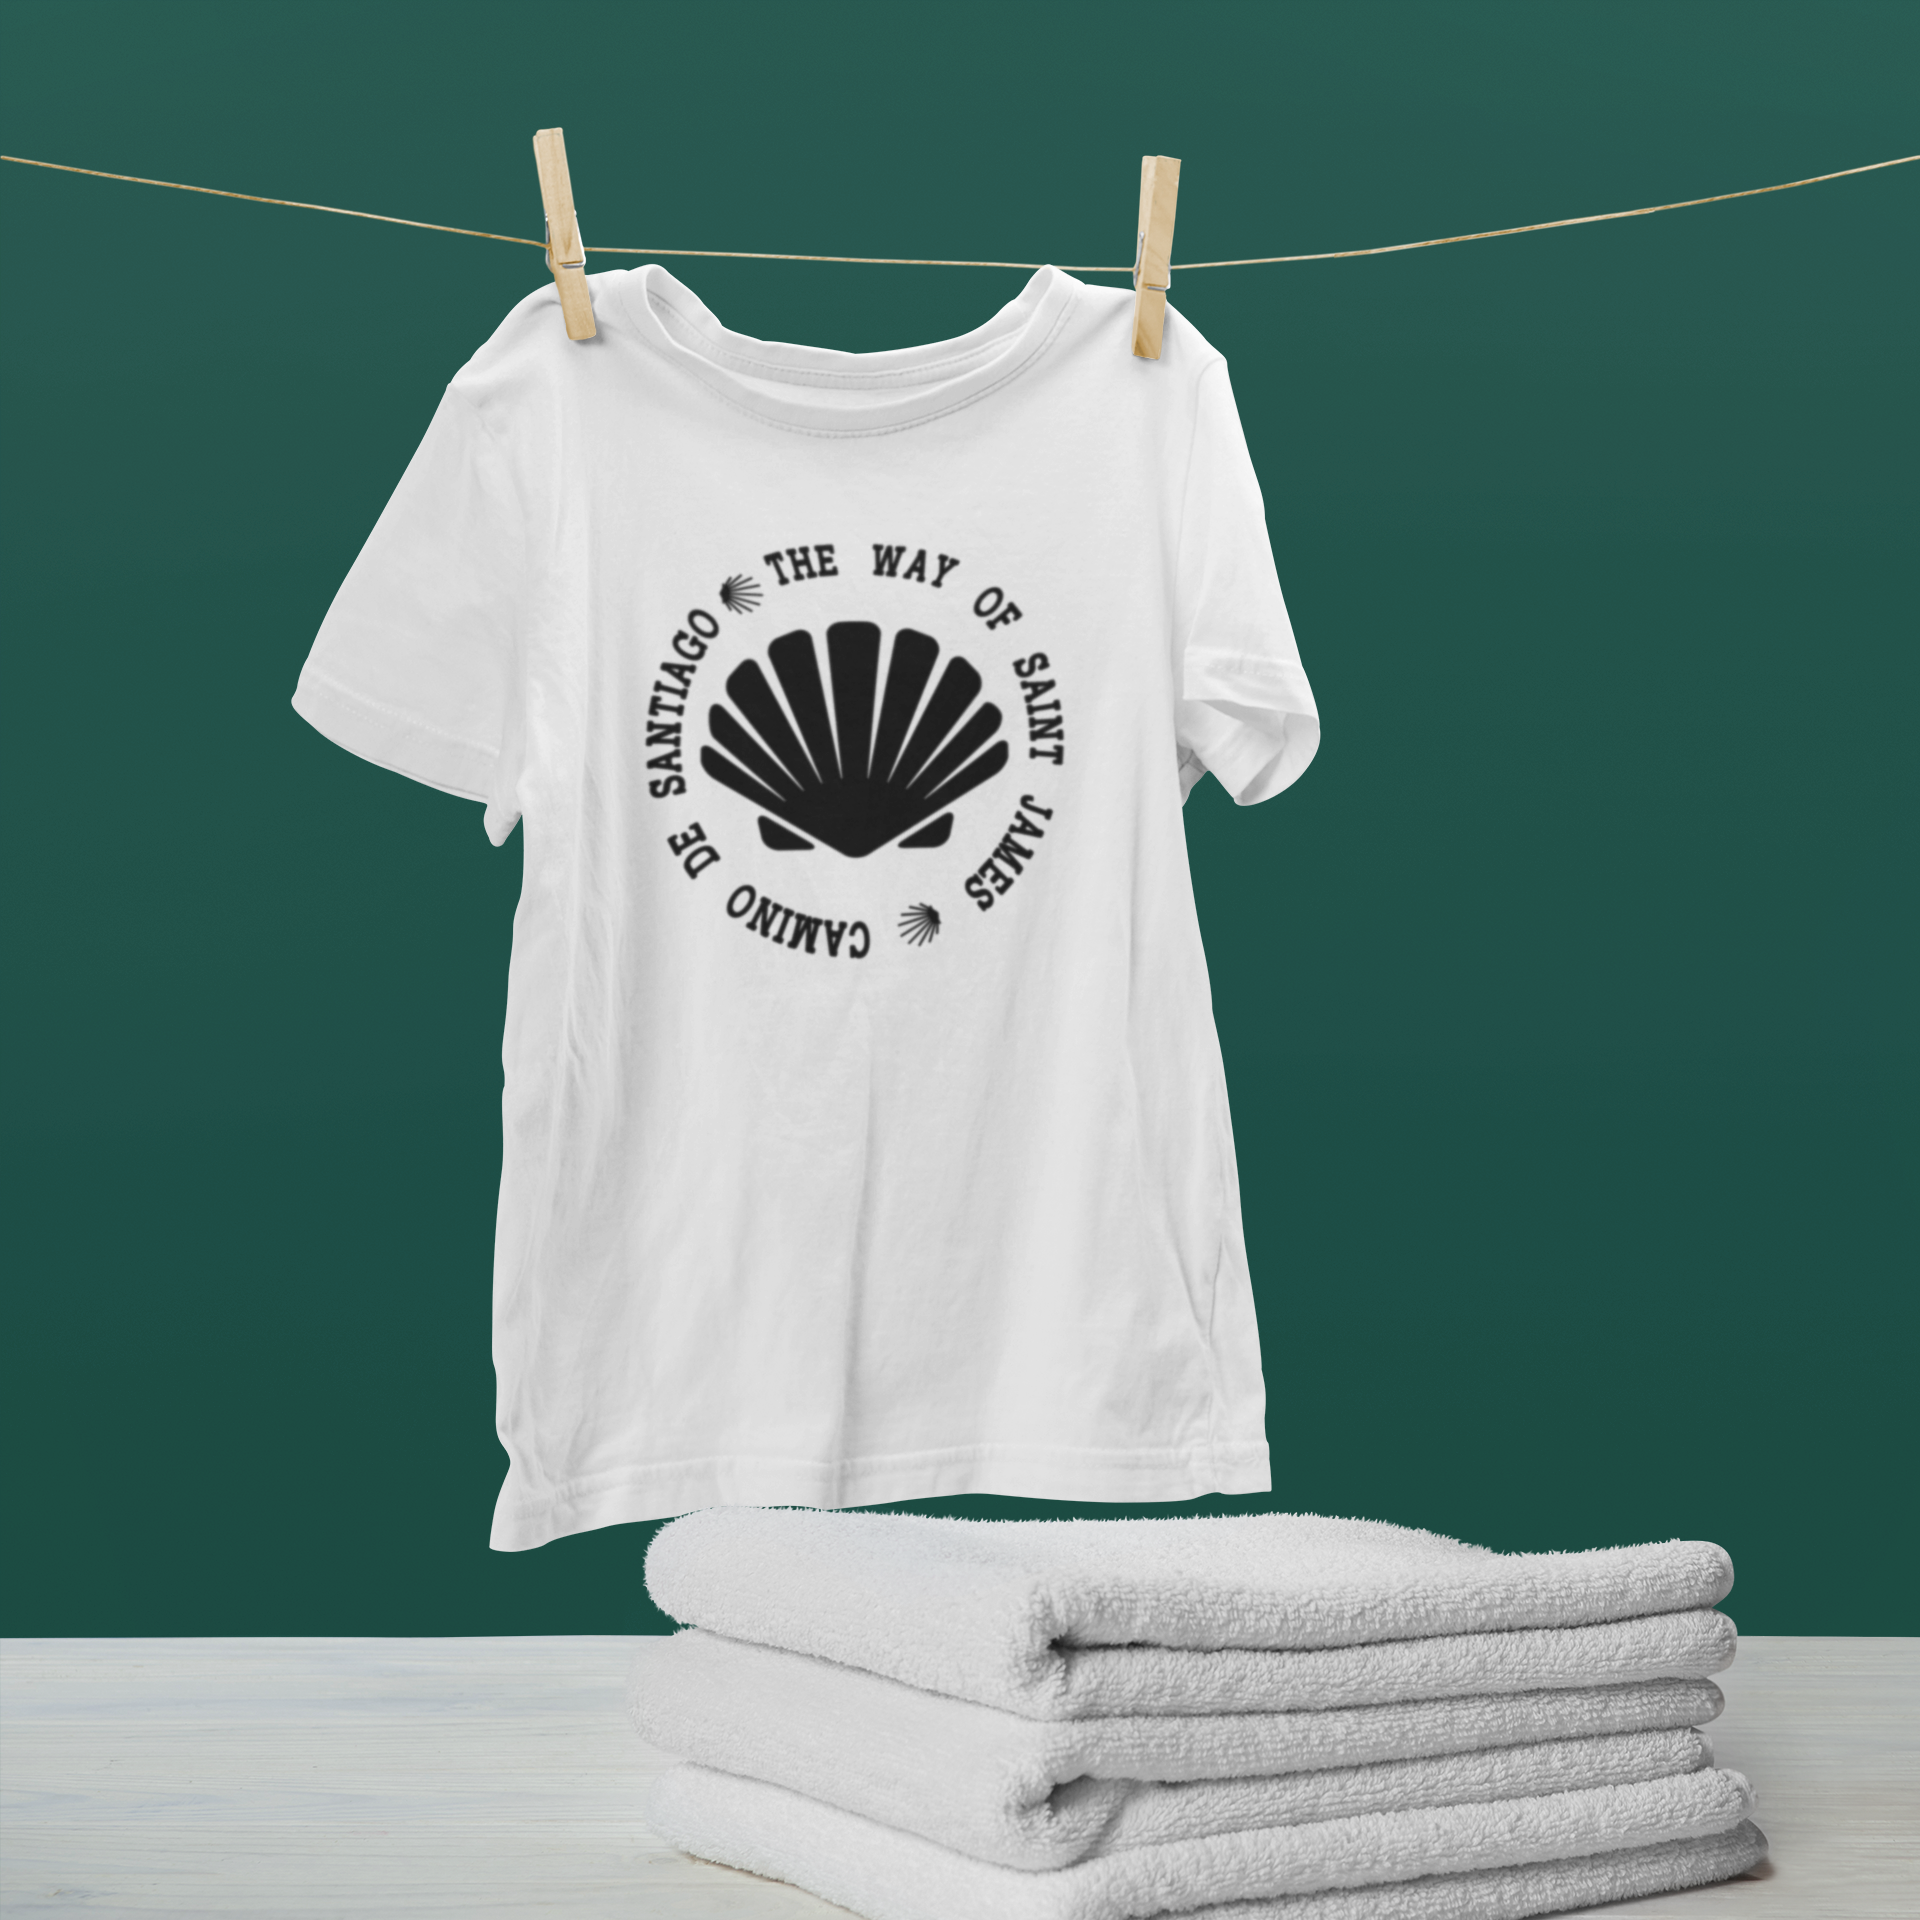 mockup-of-a-hanging-t-shirt-by-some-folded-towels-46150-r-el2 (1)